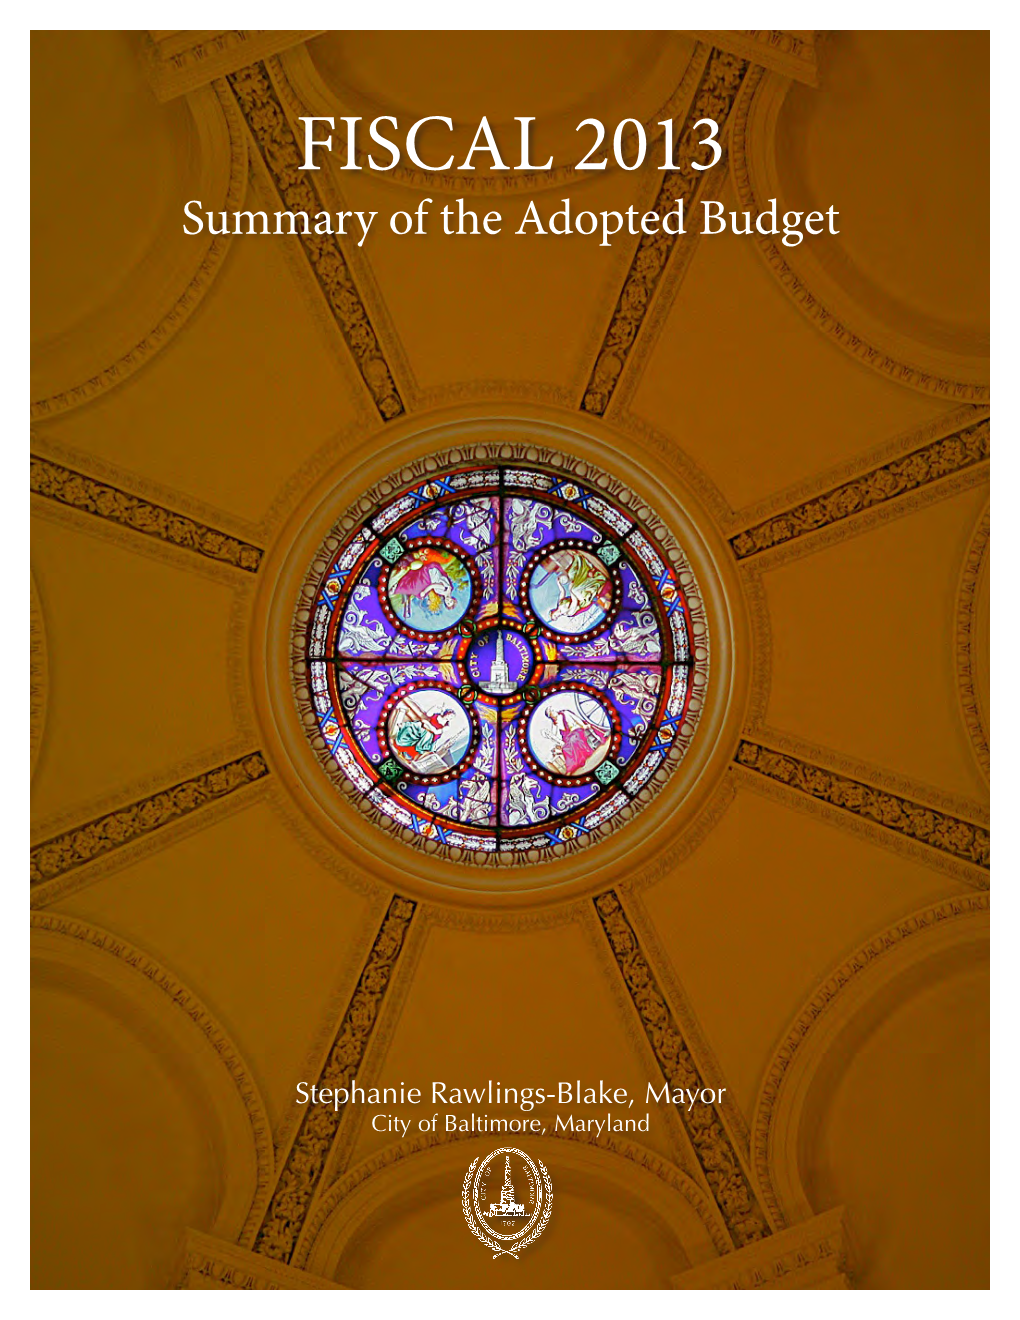 FISCAL 2013 Summary of the Adopted Budget